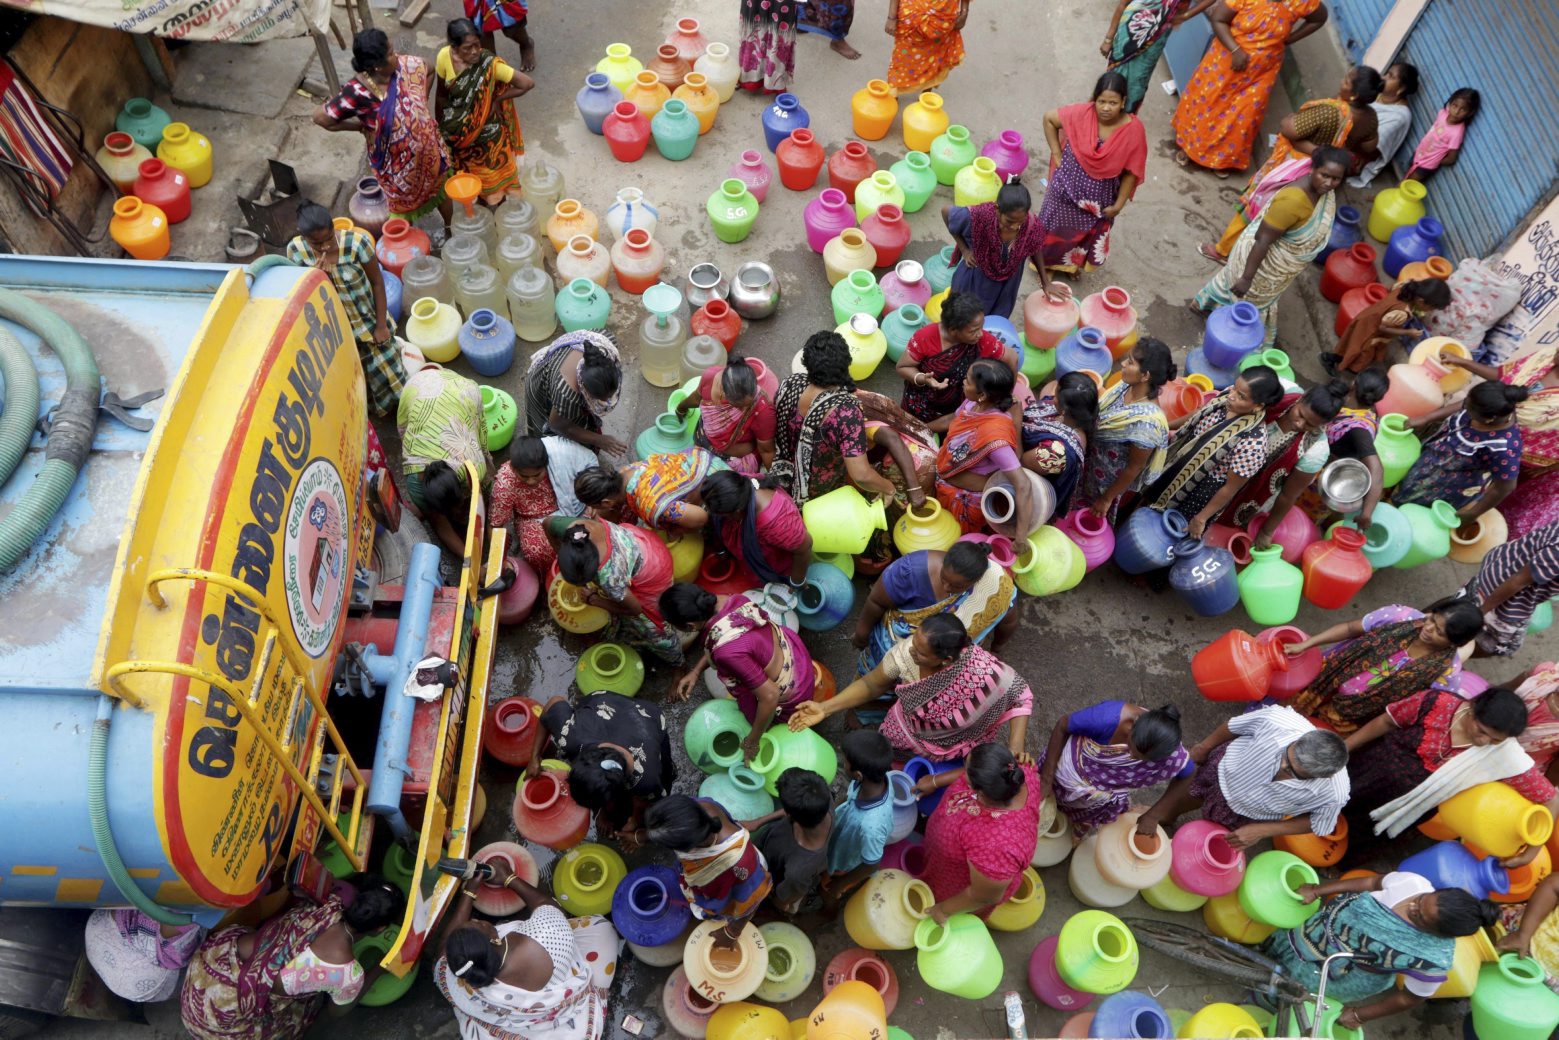 FILE- In this June 19, 2019, file photo, Indians stand in queues to fill vessels filled with drinking water from a water tanker in Chennai, capital of the southern Indian state of Tamil Nadu. With the government able to meet only 40% of water requirement, millions of people are depending on water tank trucks in the southern Indian state of Tamil Nadu because of an acute water shortage caused by drying lakes and deplete groundwater. (AP Photo/R. Parthibhan, File) India Water Shortage